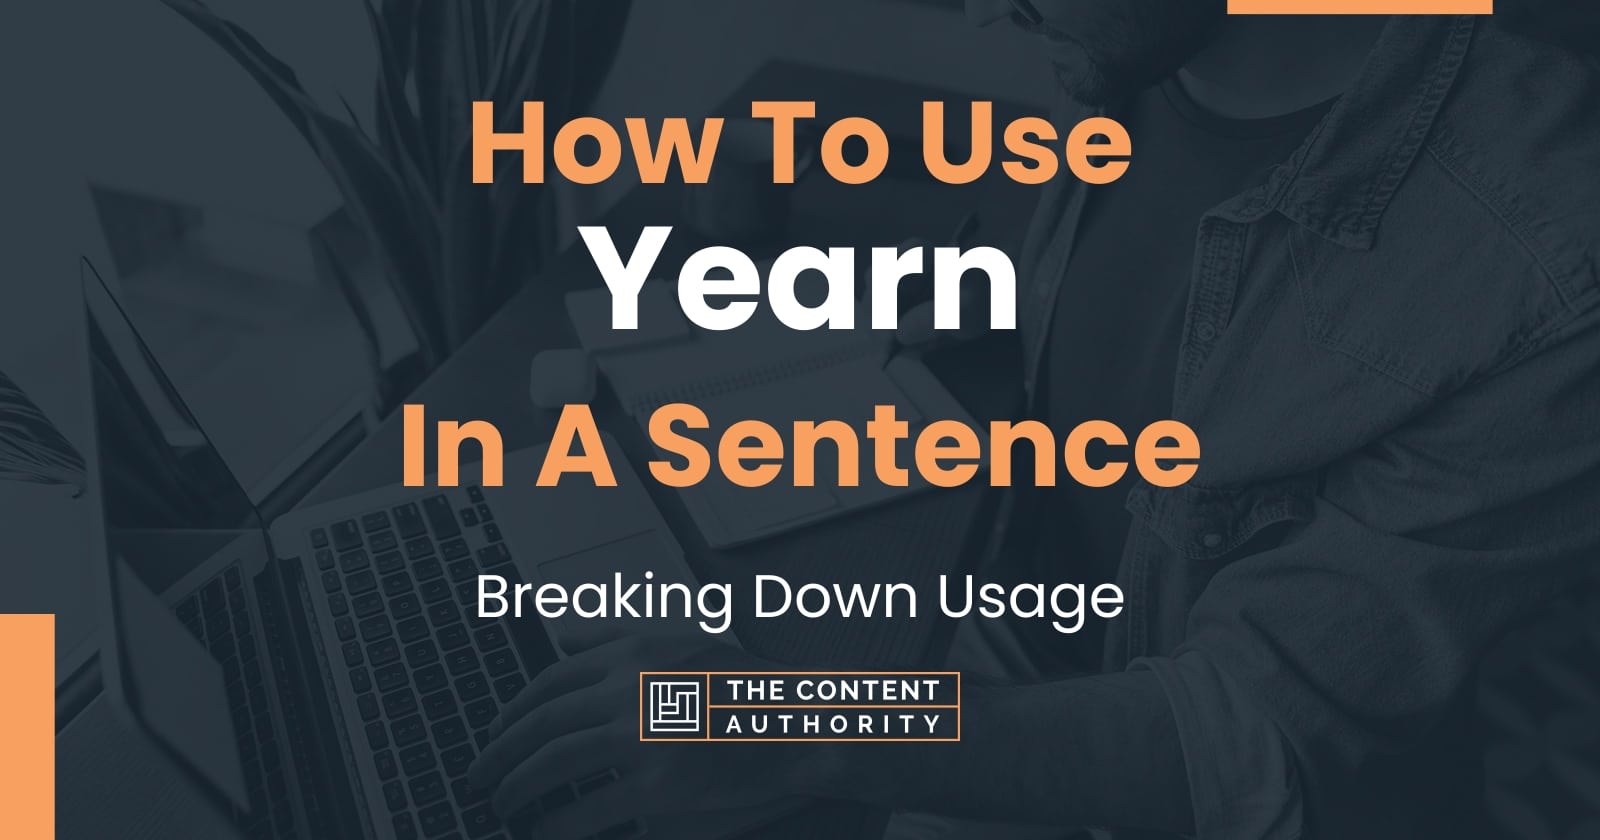 YEARN Definition & Usage Examples